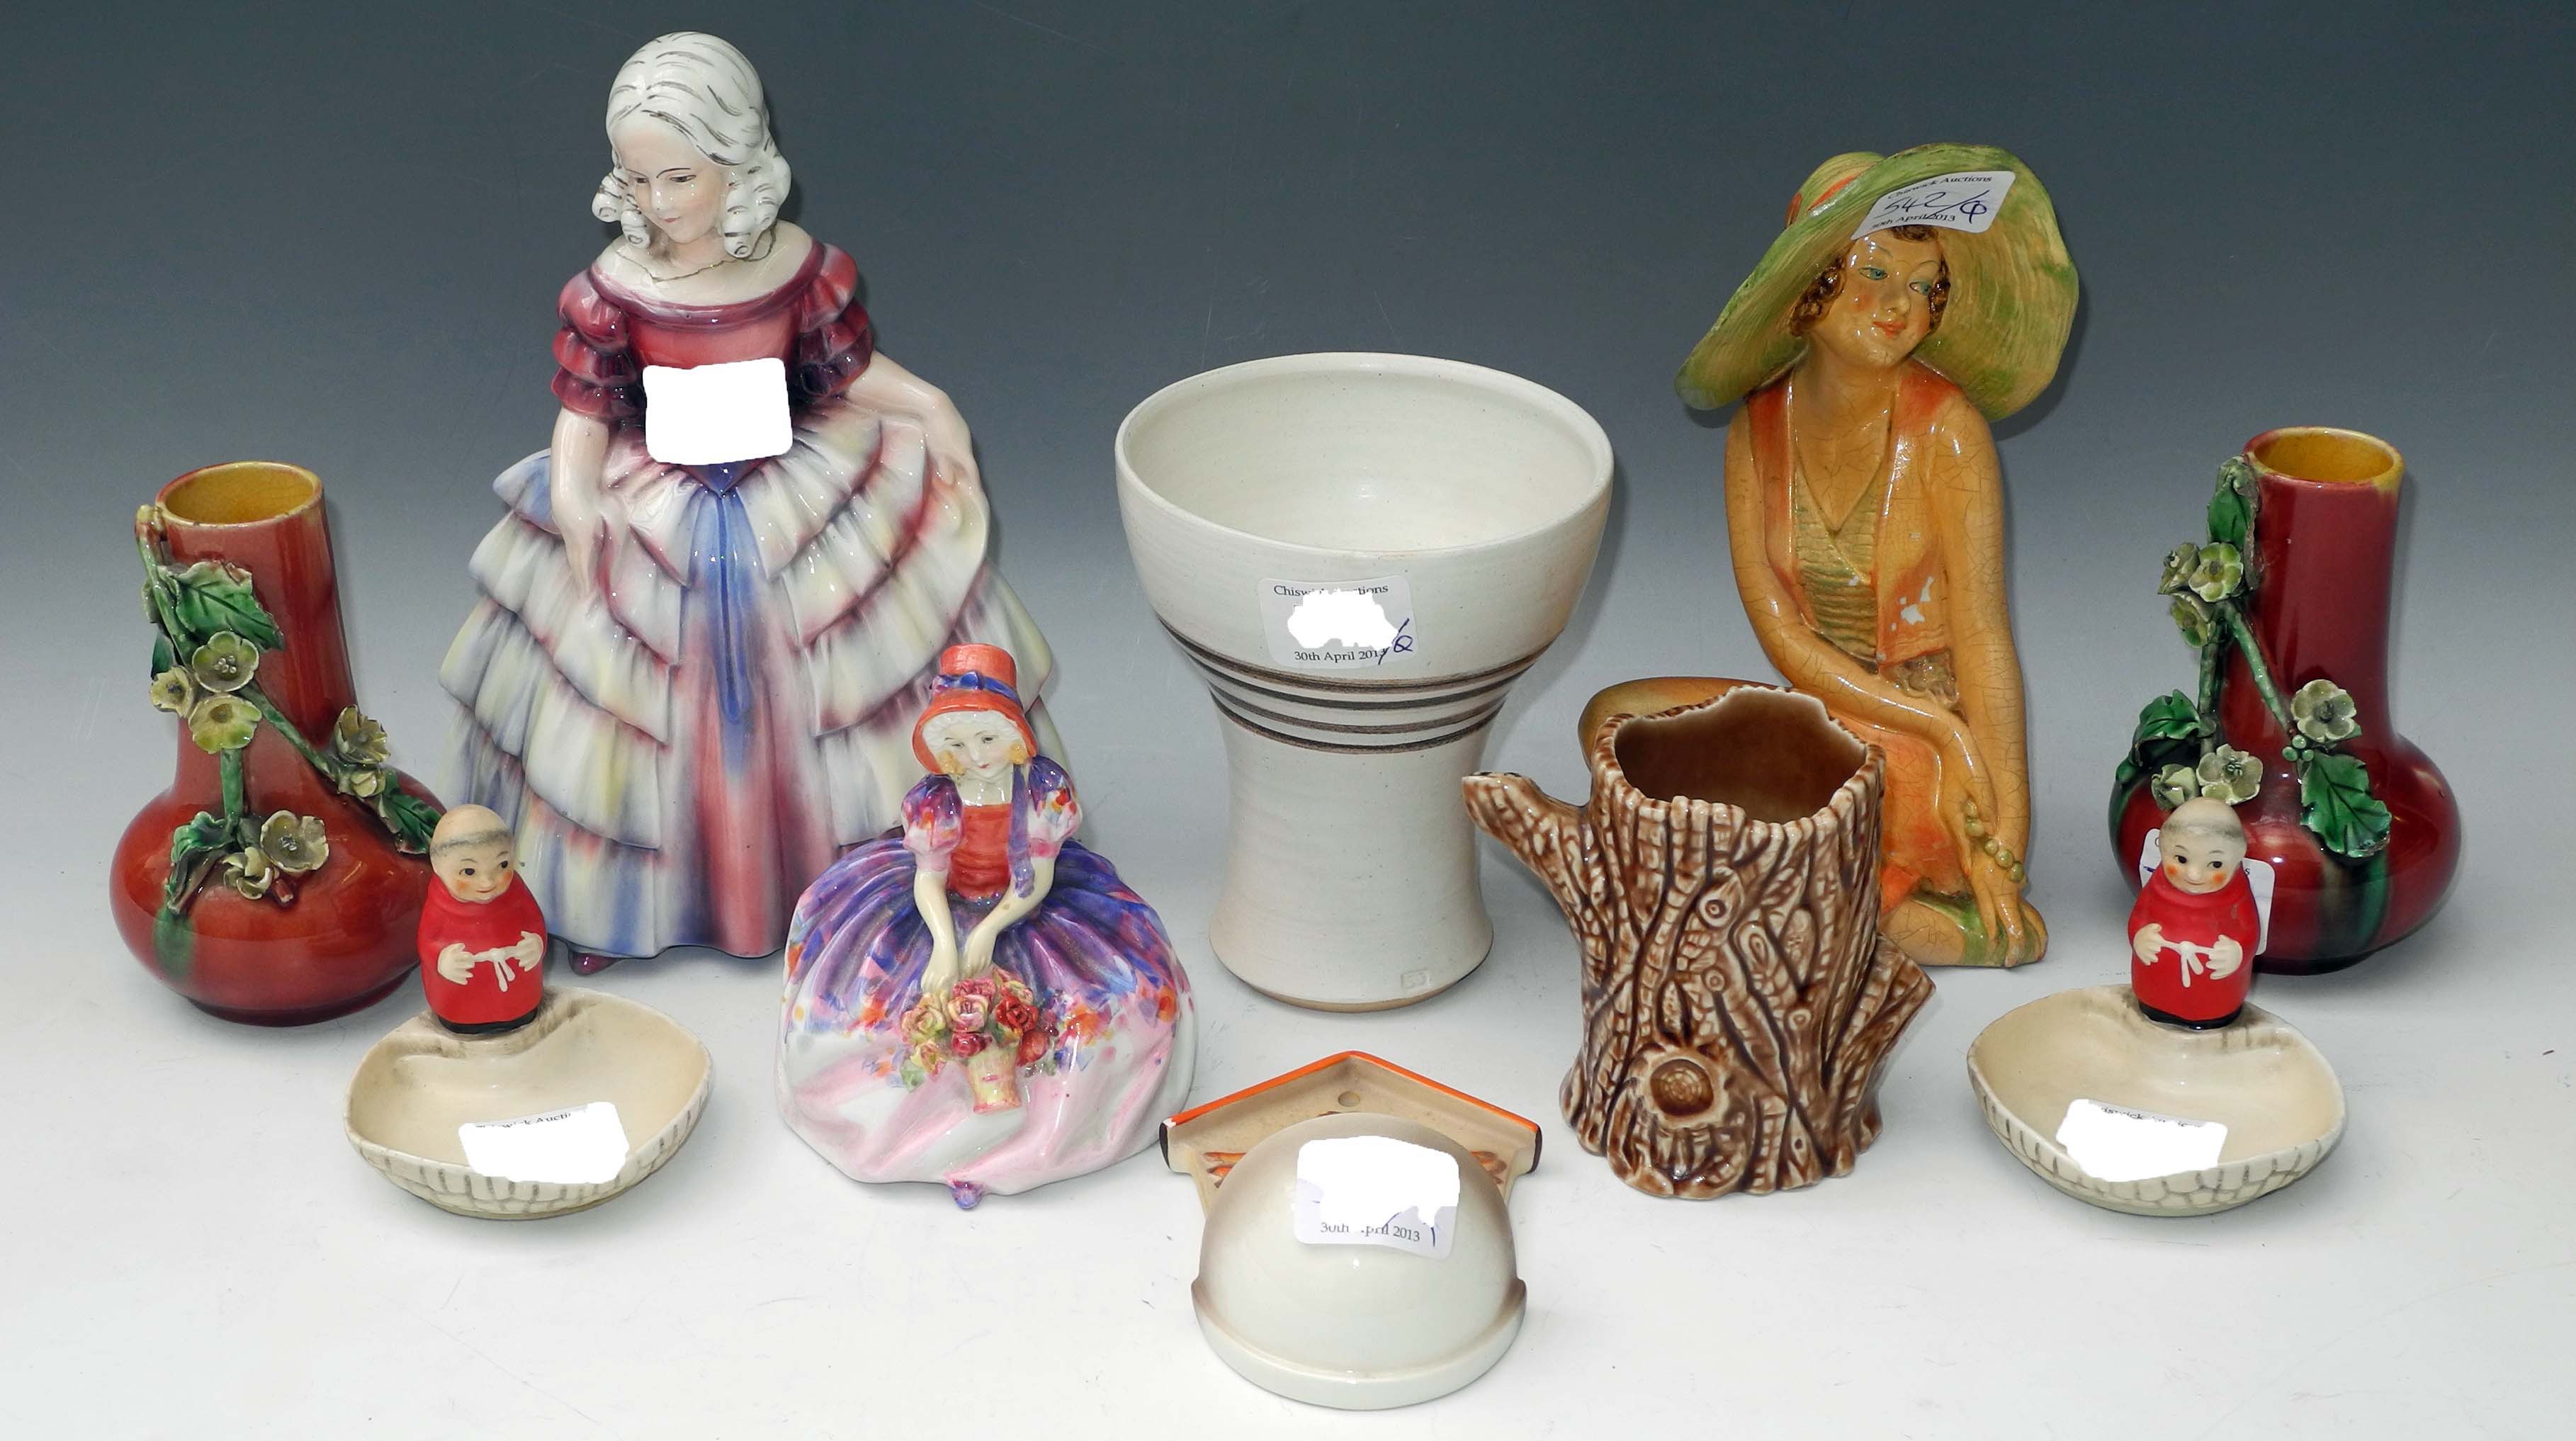 A Royal Doulton figure of "Monica" sold together with a Wade figure of "June", two Goebel mark